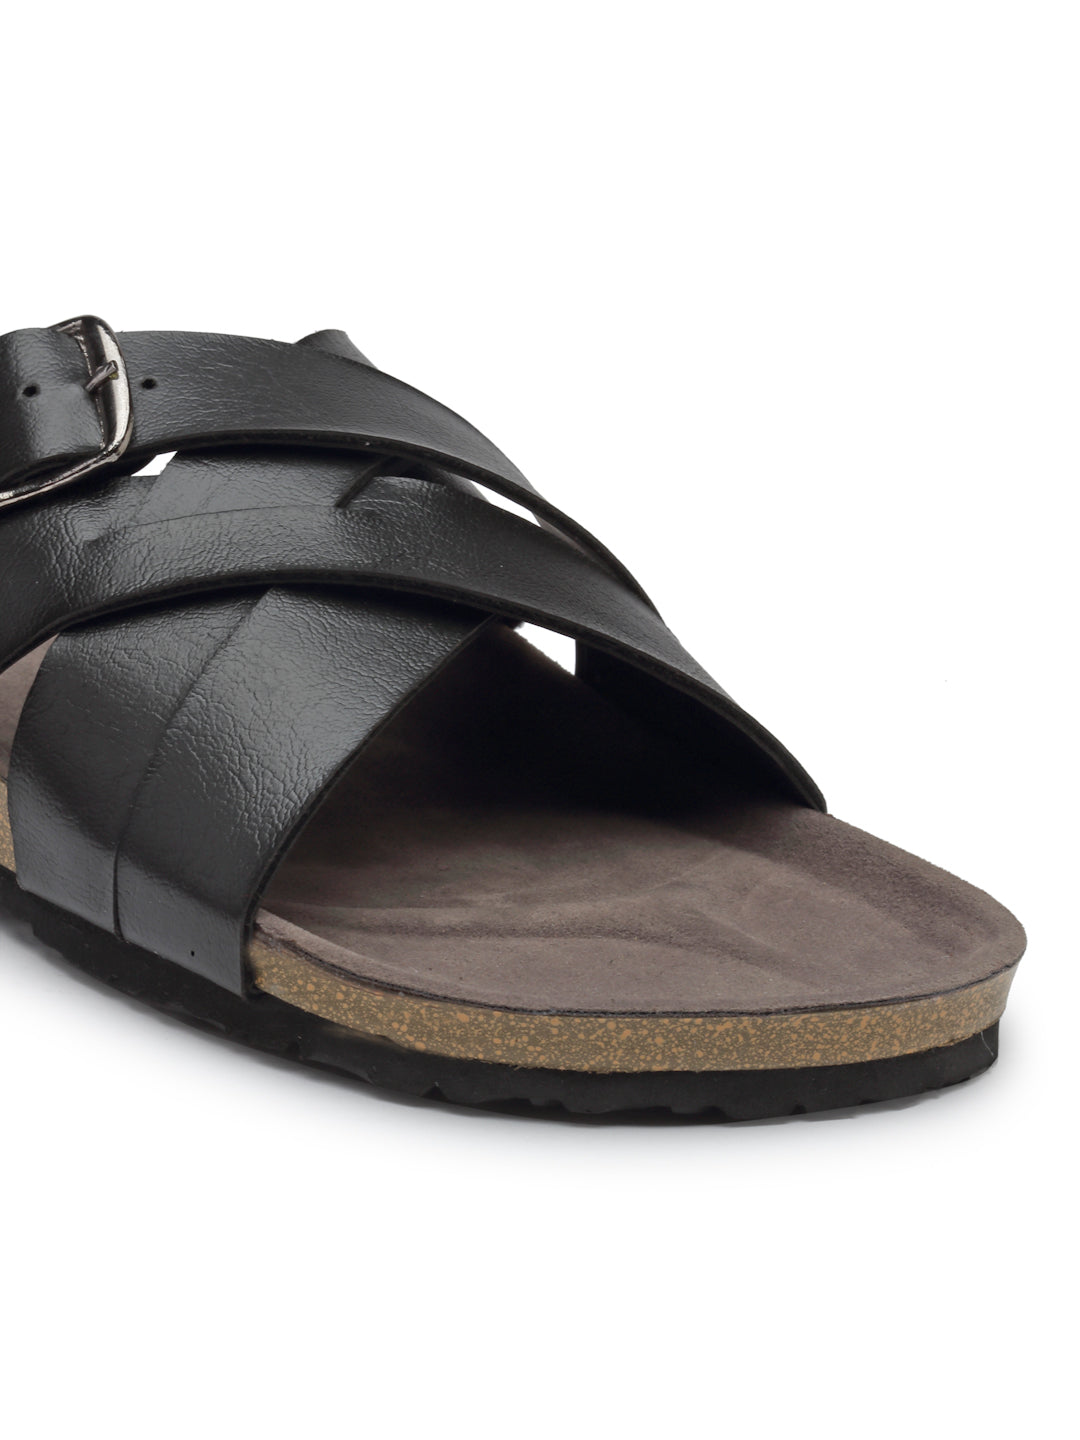 Men's Black Synthetic Leather Slip On Casual Sandals